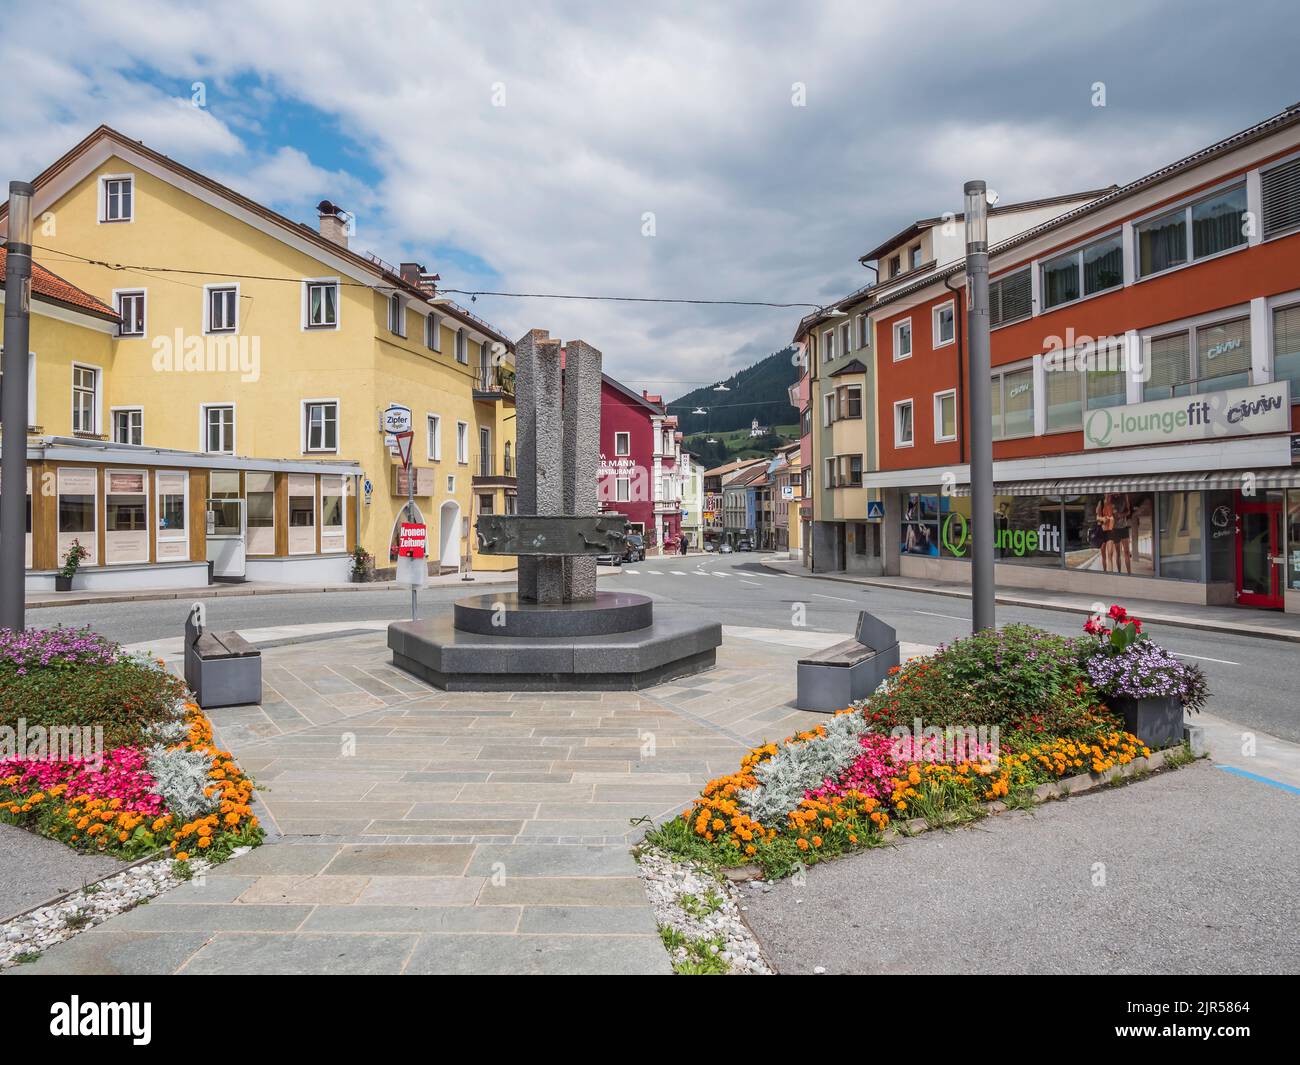 Typical street scene at Steinach am Brenner a working town located on the main road of the Wipptal valley between Innsbruck and the Brenner Pass Stock Photo